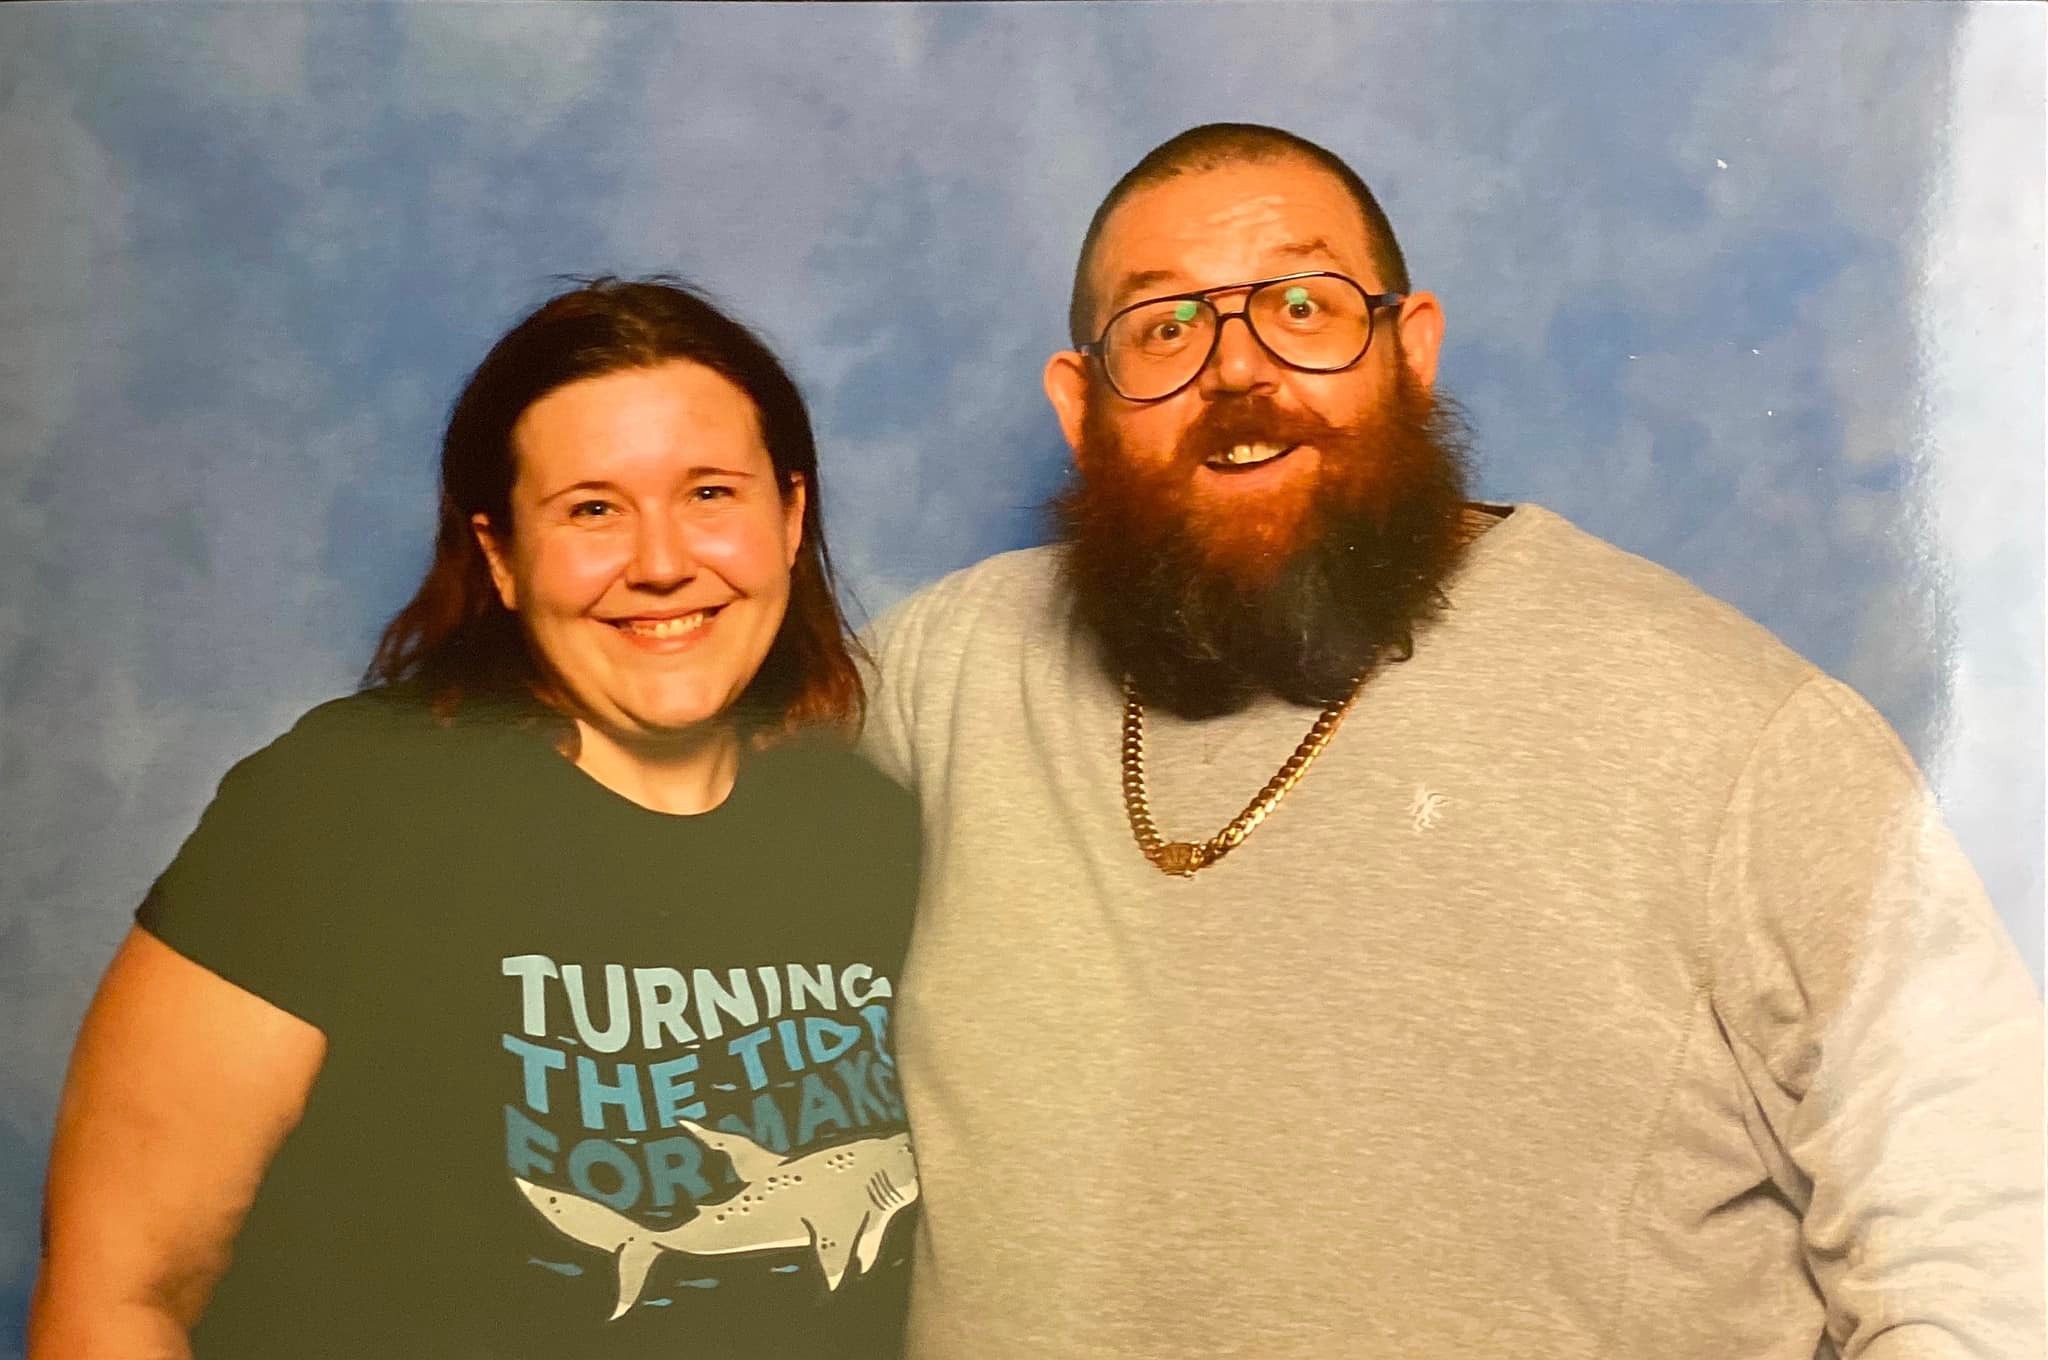 Nick Frost